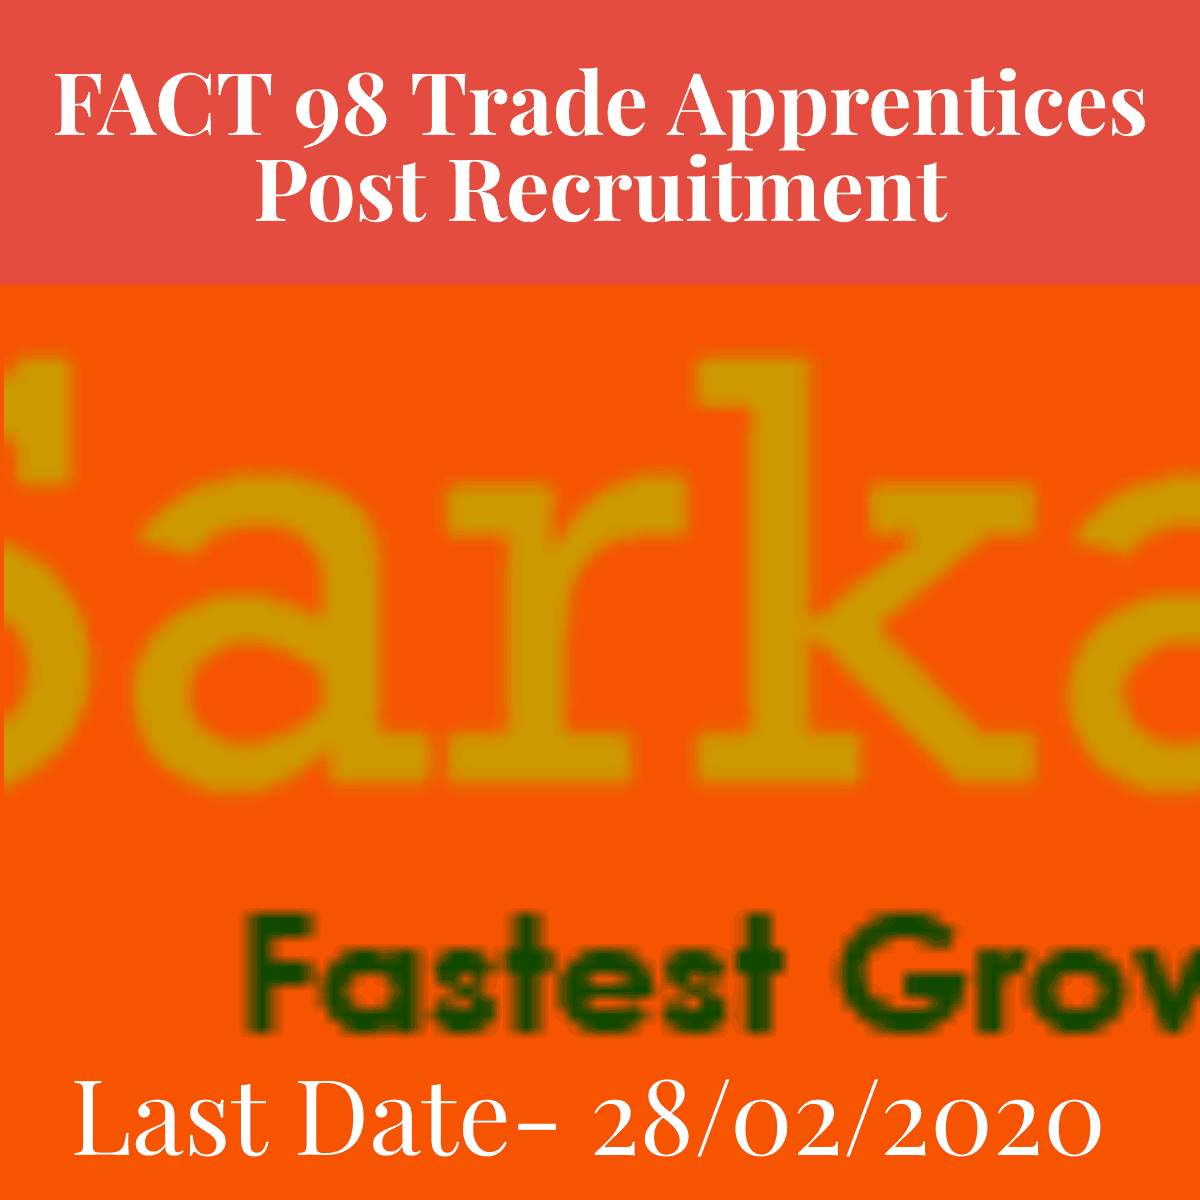 FACT Recruitment 2020 For Trade Apprentices Post